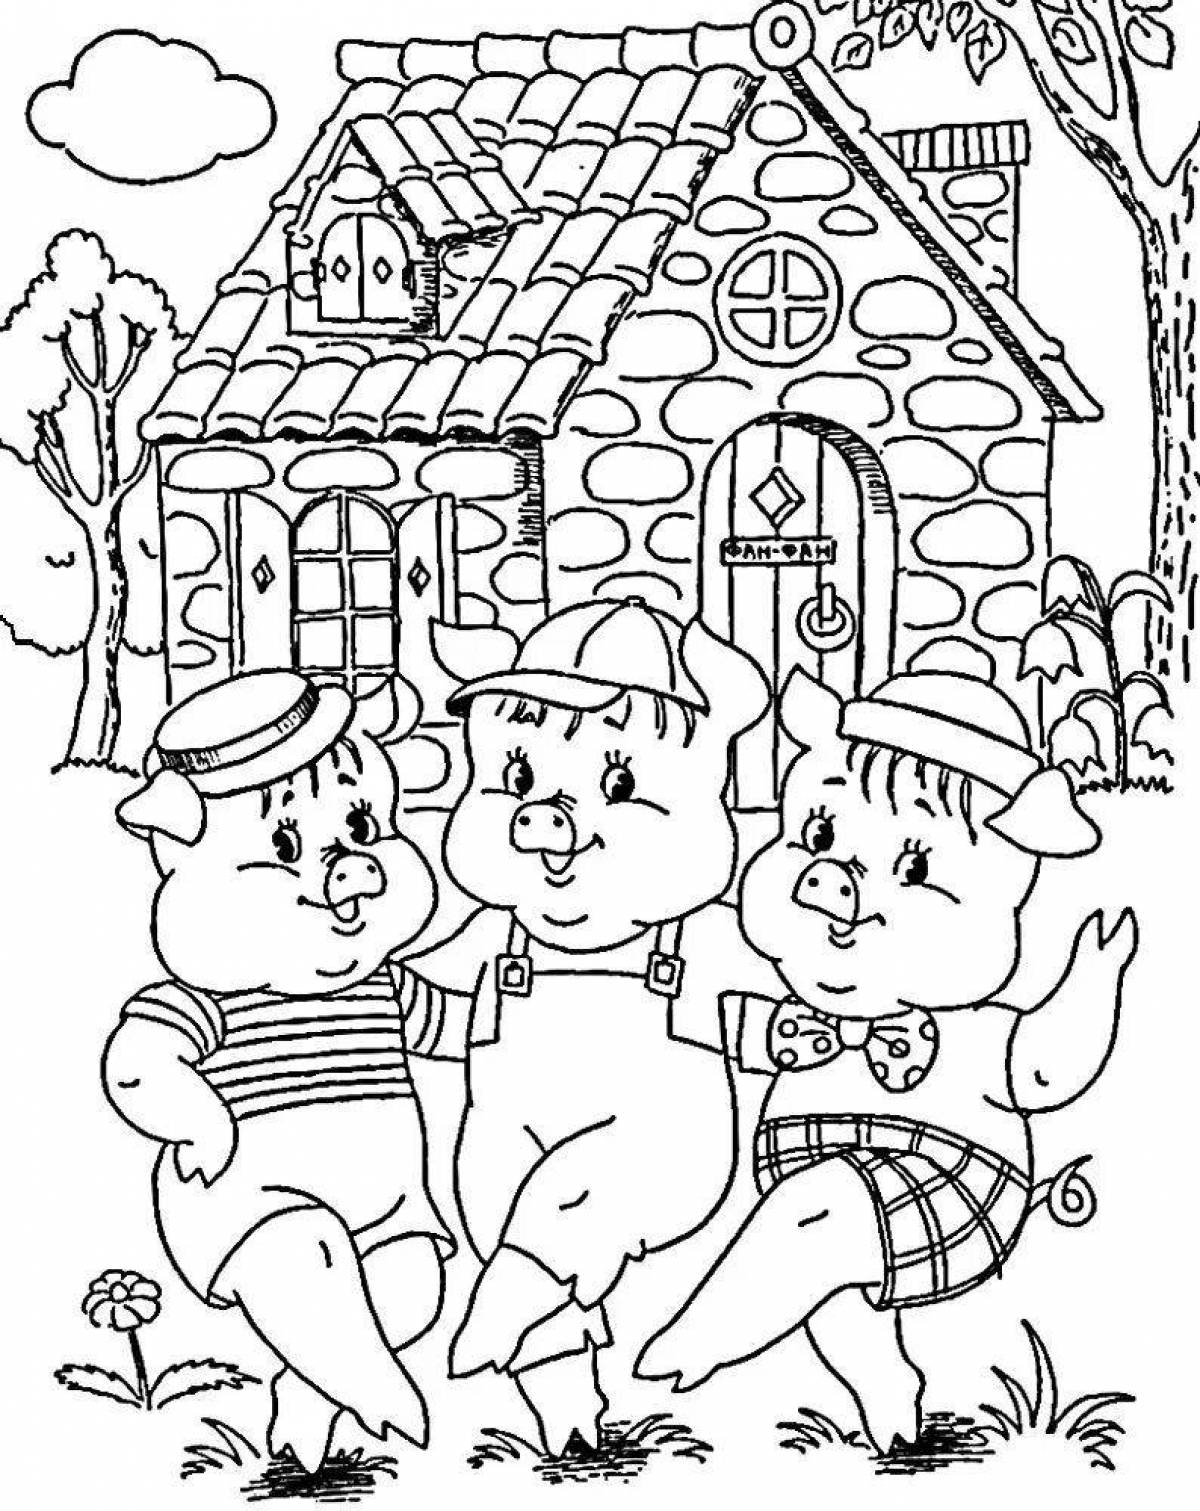 Colorful fairy tale coloring book